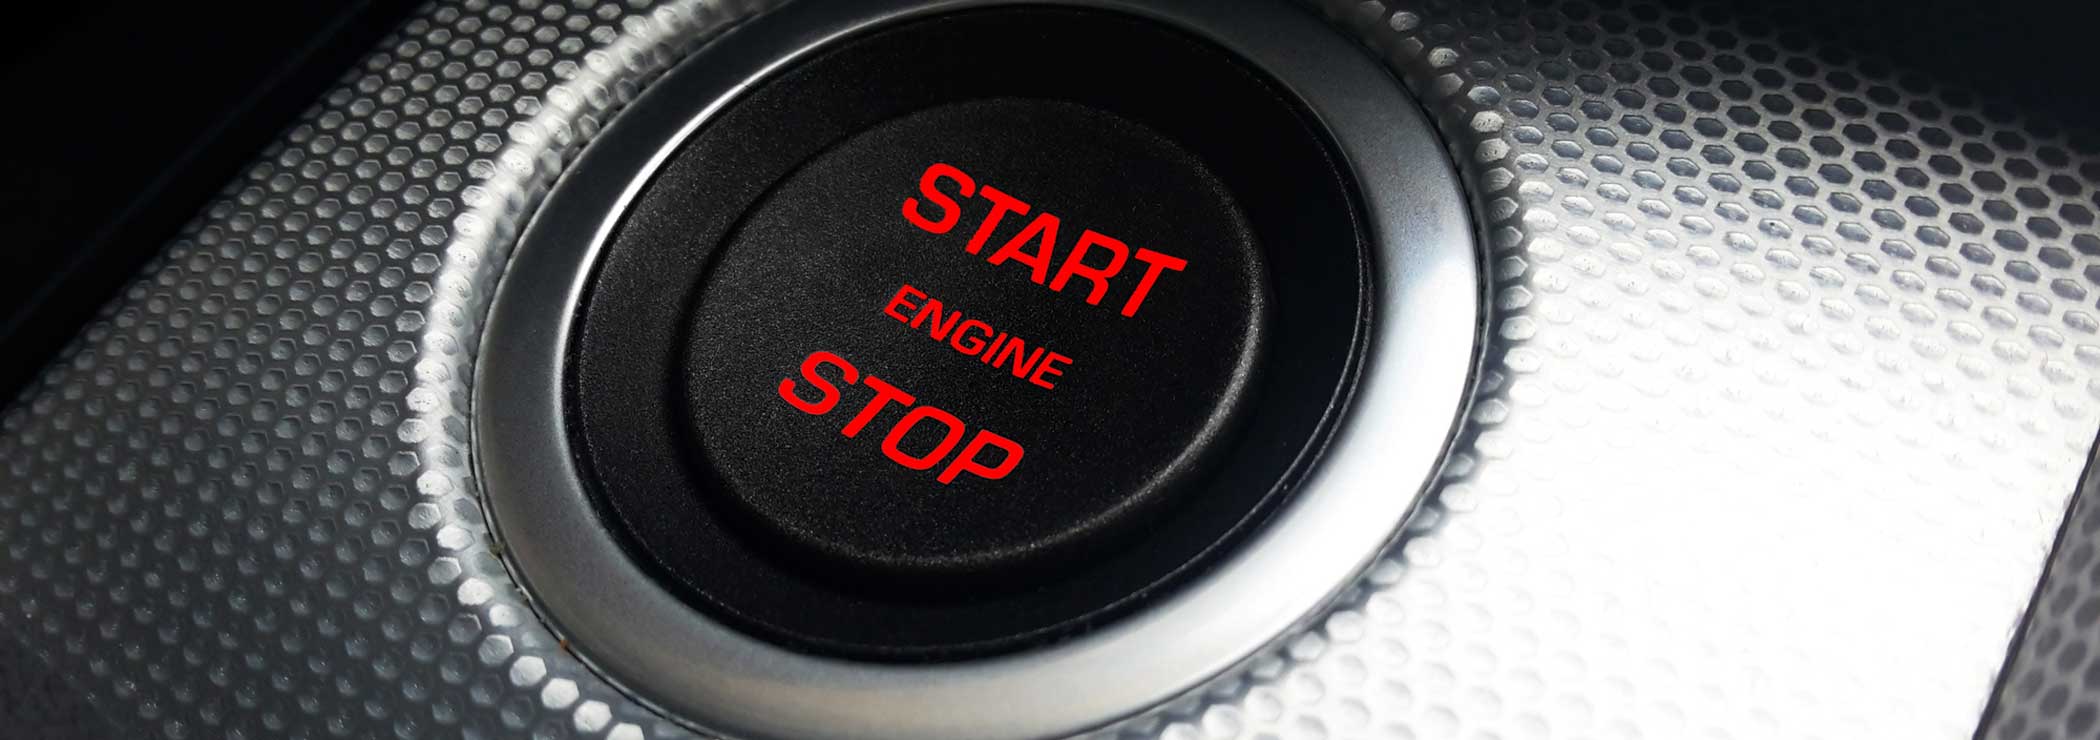 Start Button: ready for ISO 26262!